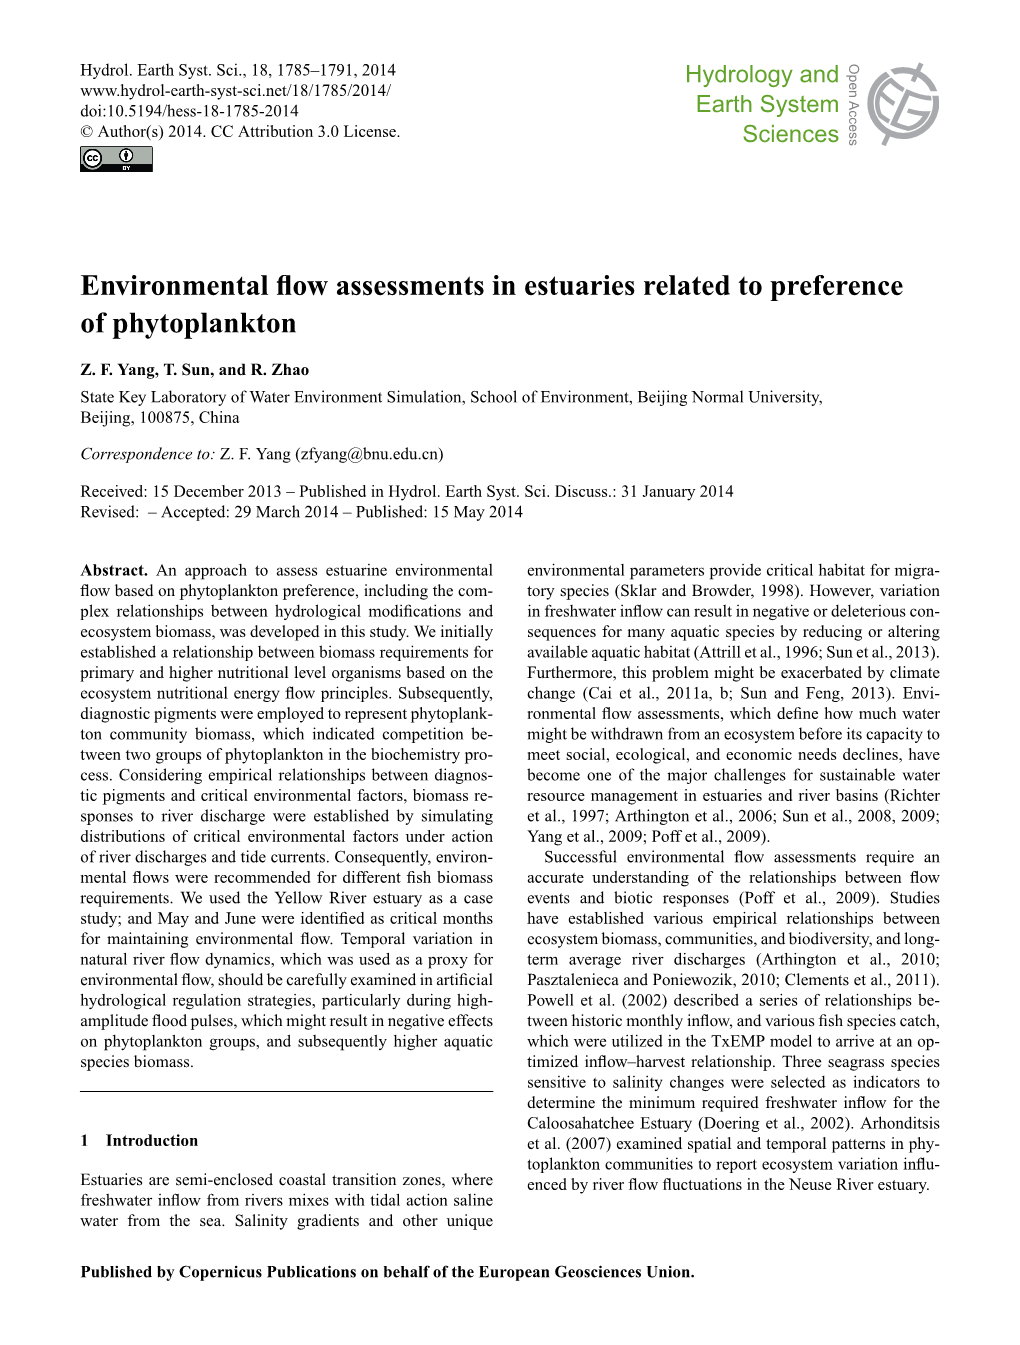 Environmental Flow Assessments in Estuaries Related to Preference of Phytoplankton